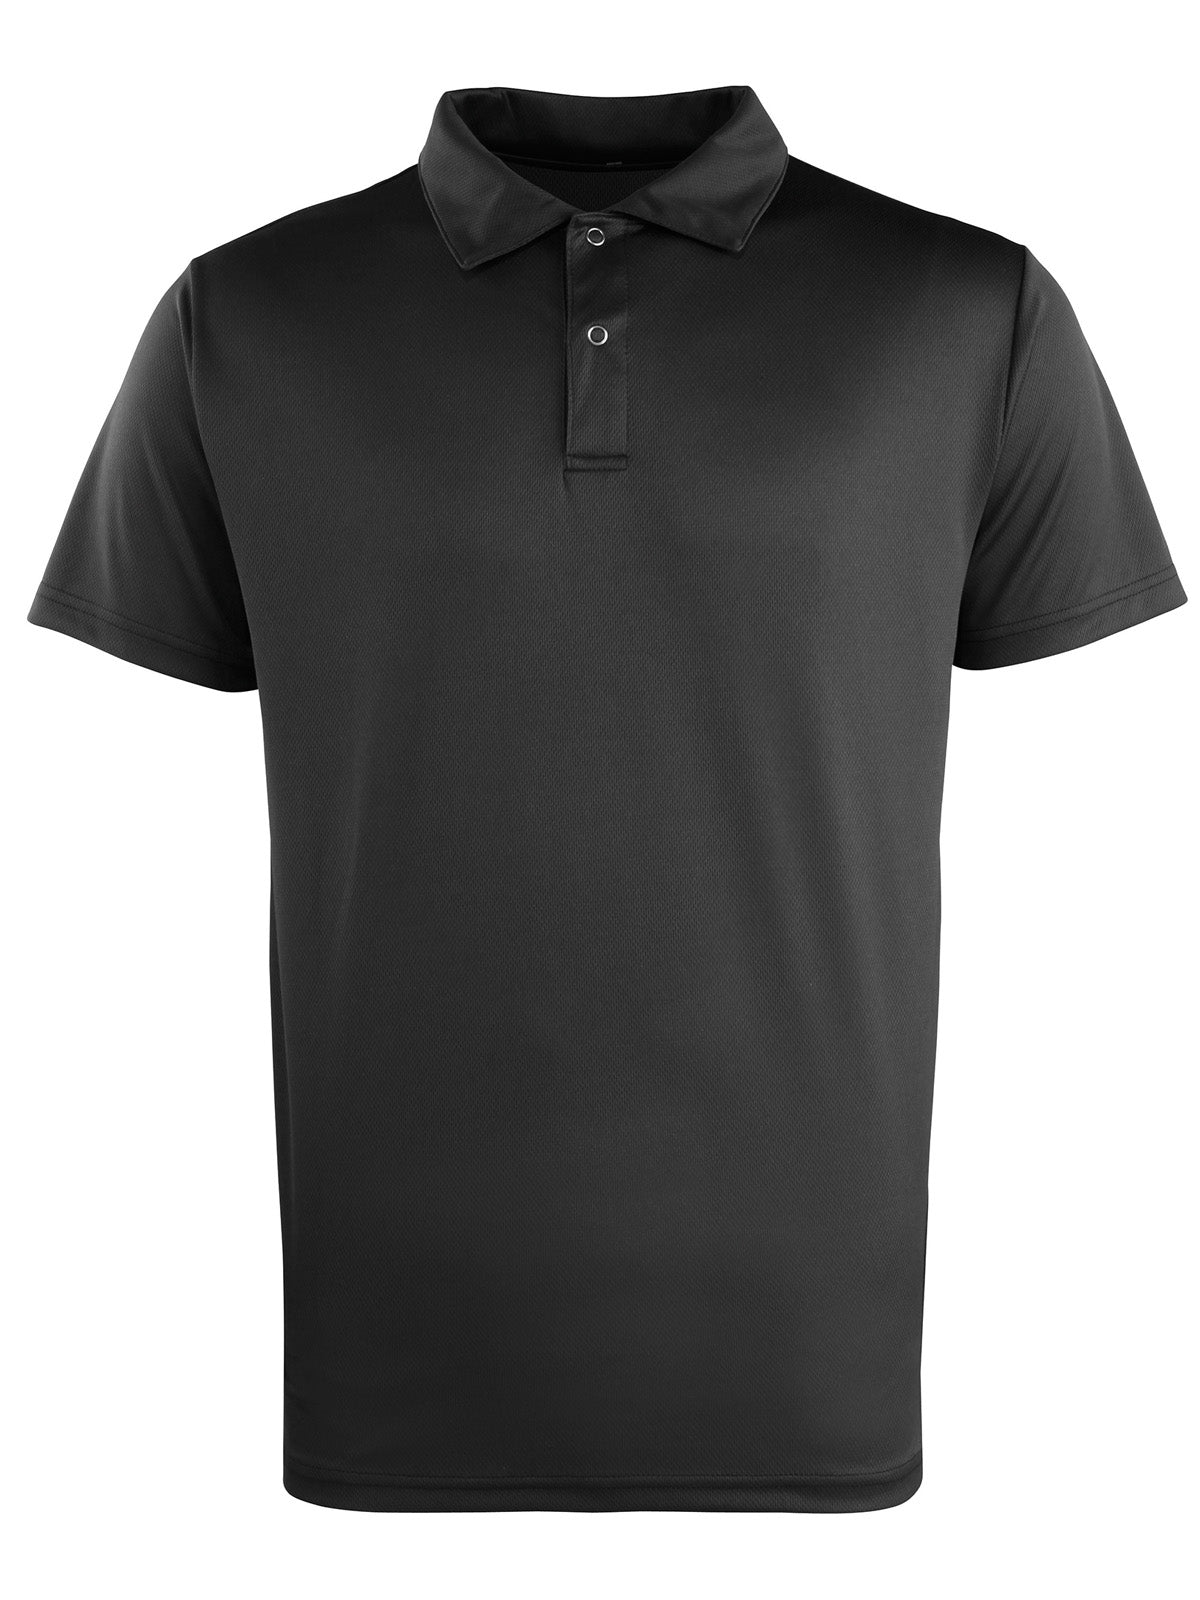 Photo of Premier Coolchecker Studded Polo in Black, front view